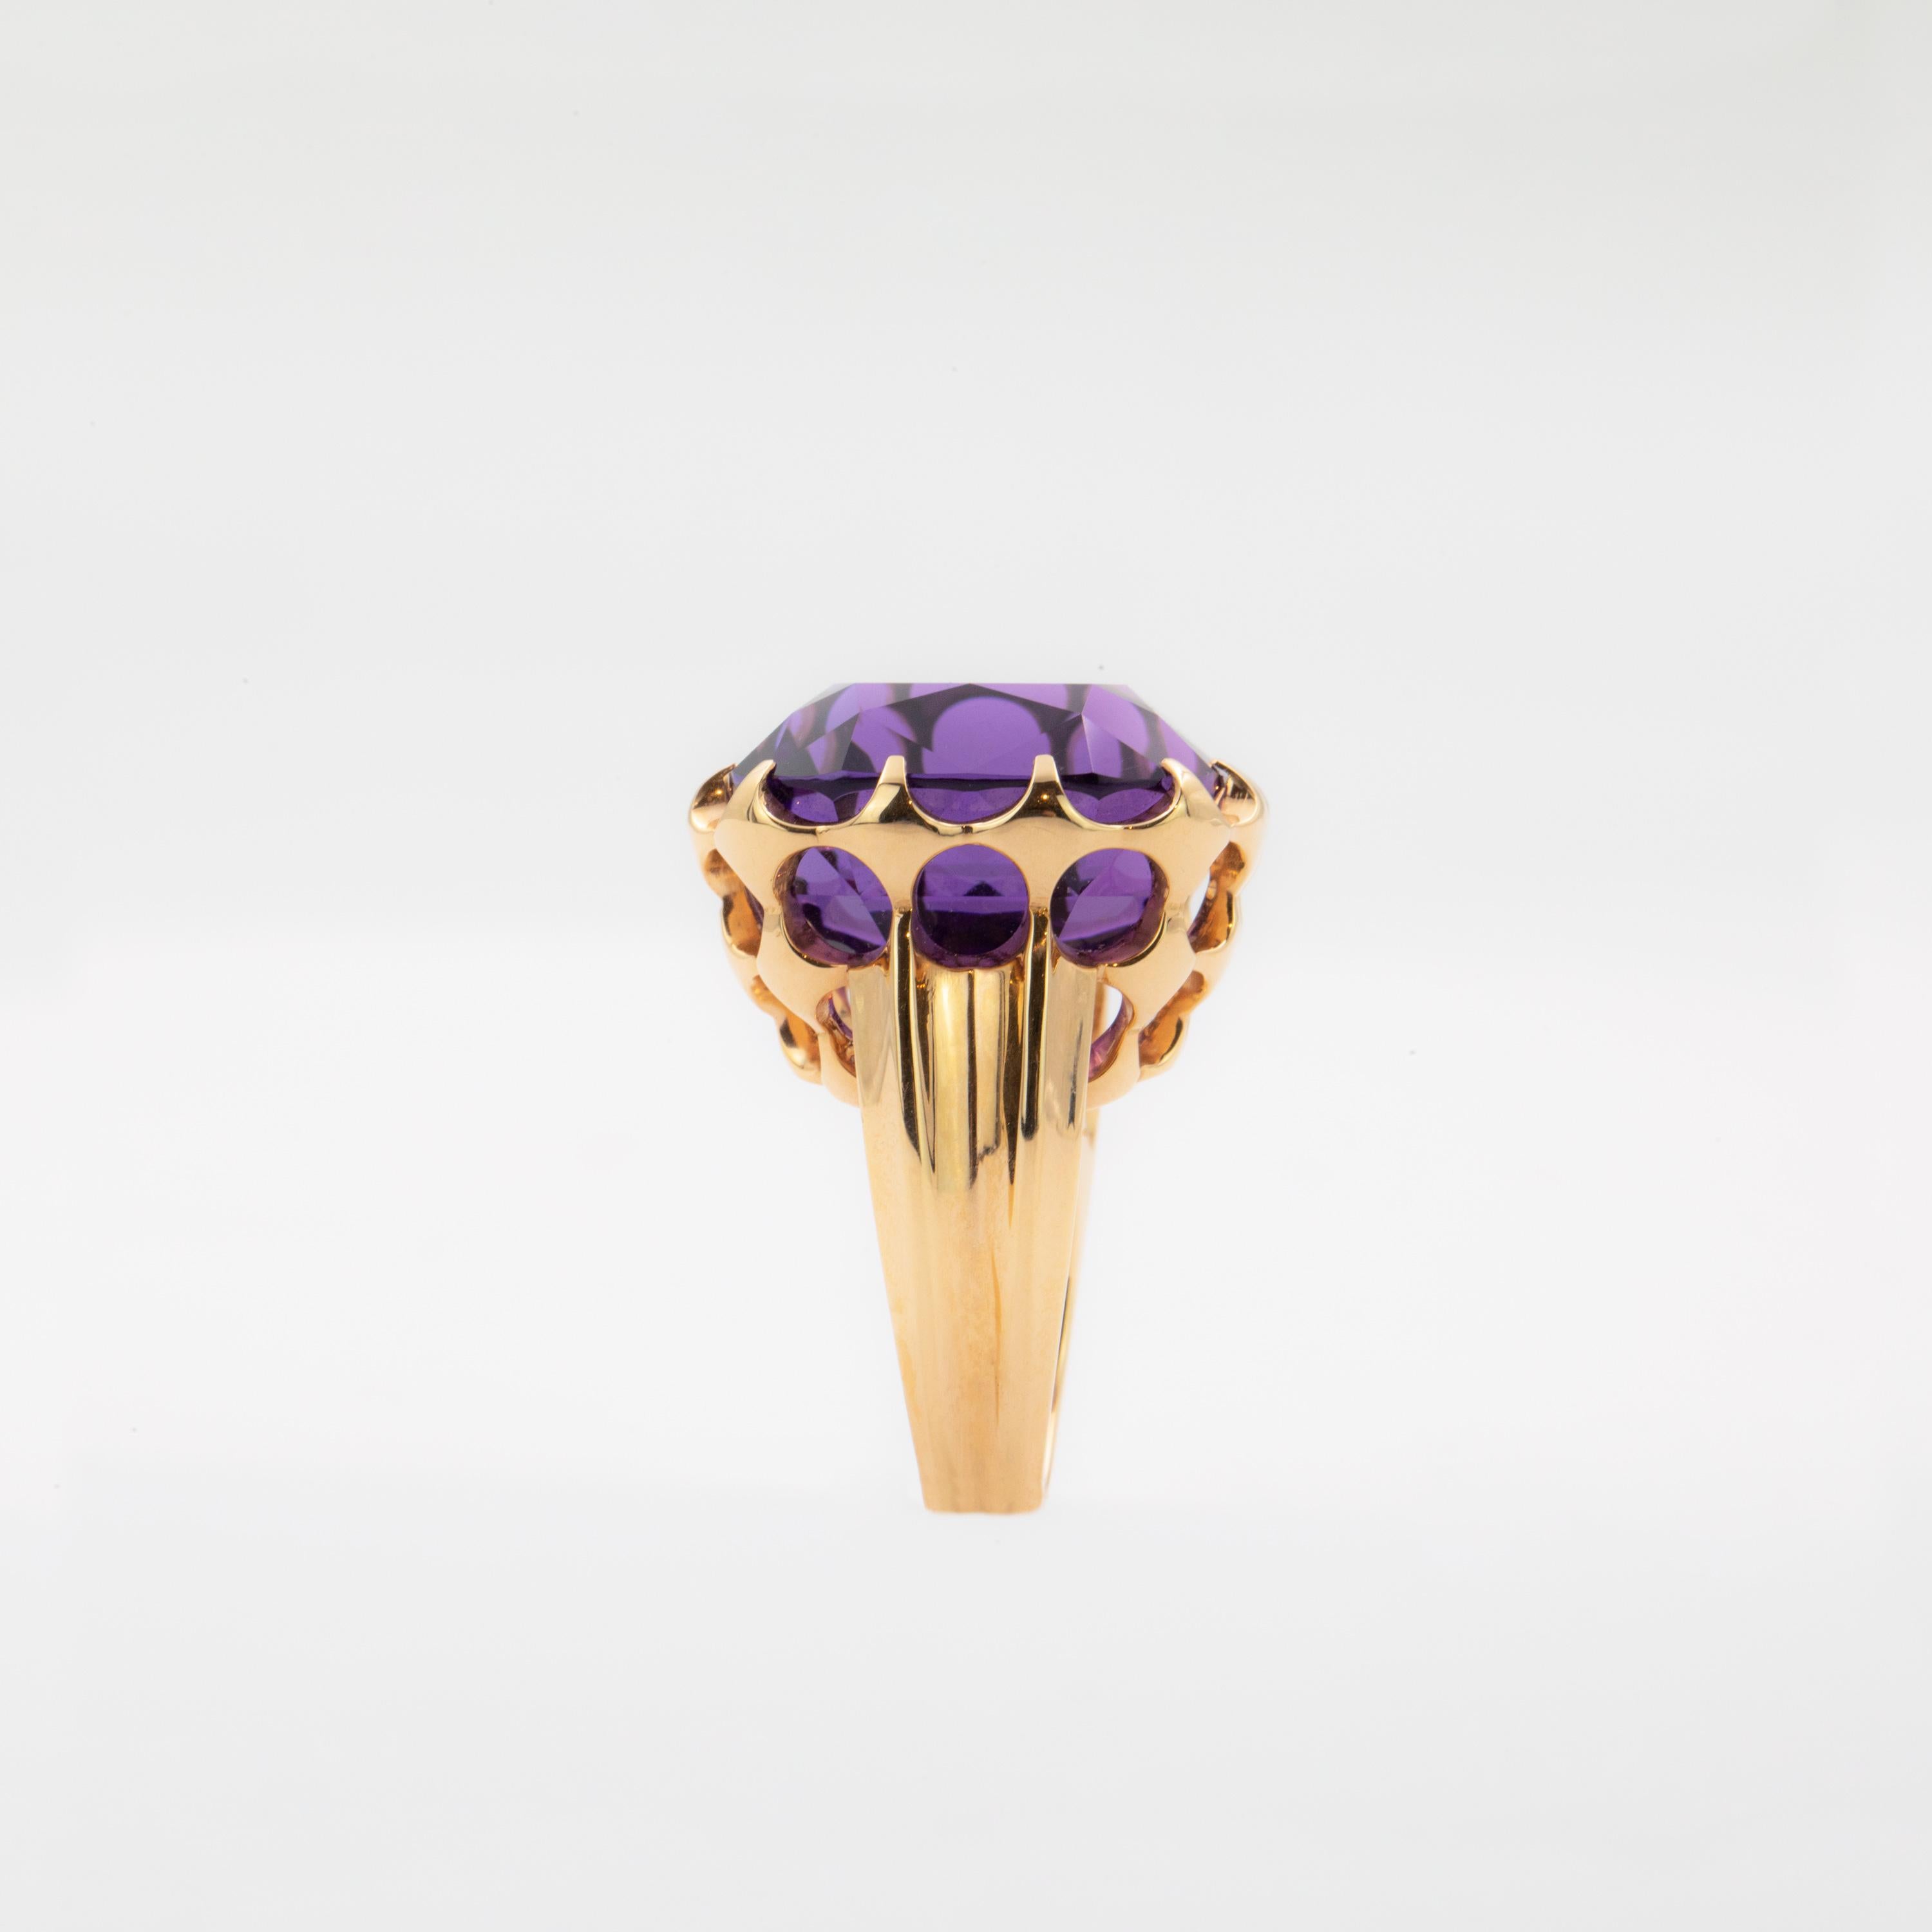 The 18 karat pink gold setting conveys an architectural structure. Its porous surface allows the light to reflect on multiple surfaces, enabling the 37.38 carat cushion-cut Amethyst from Brazil to unfold its true, vivid purple colour. The